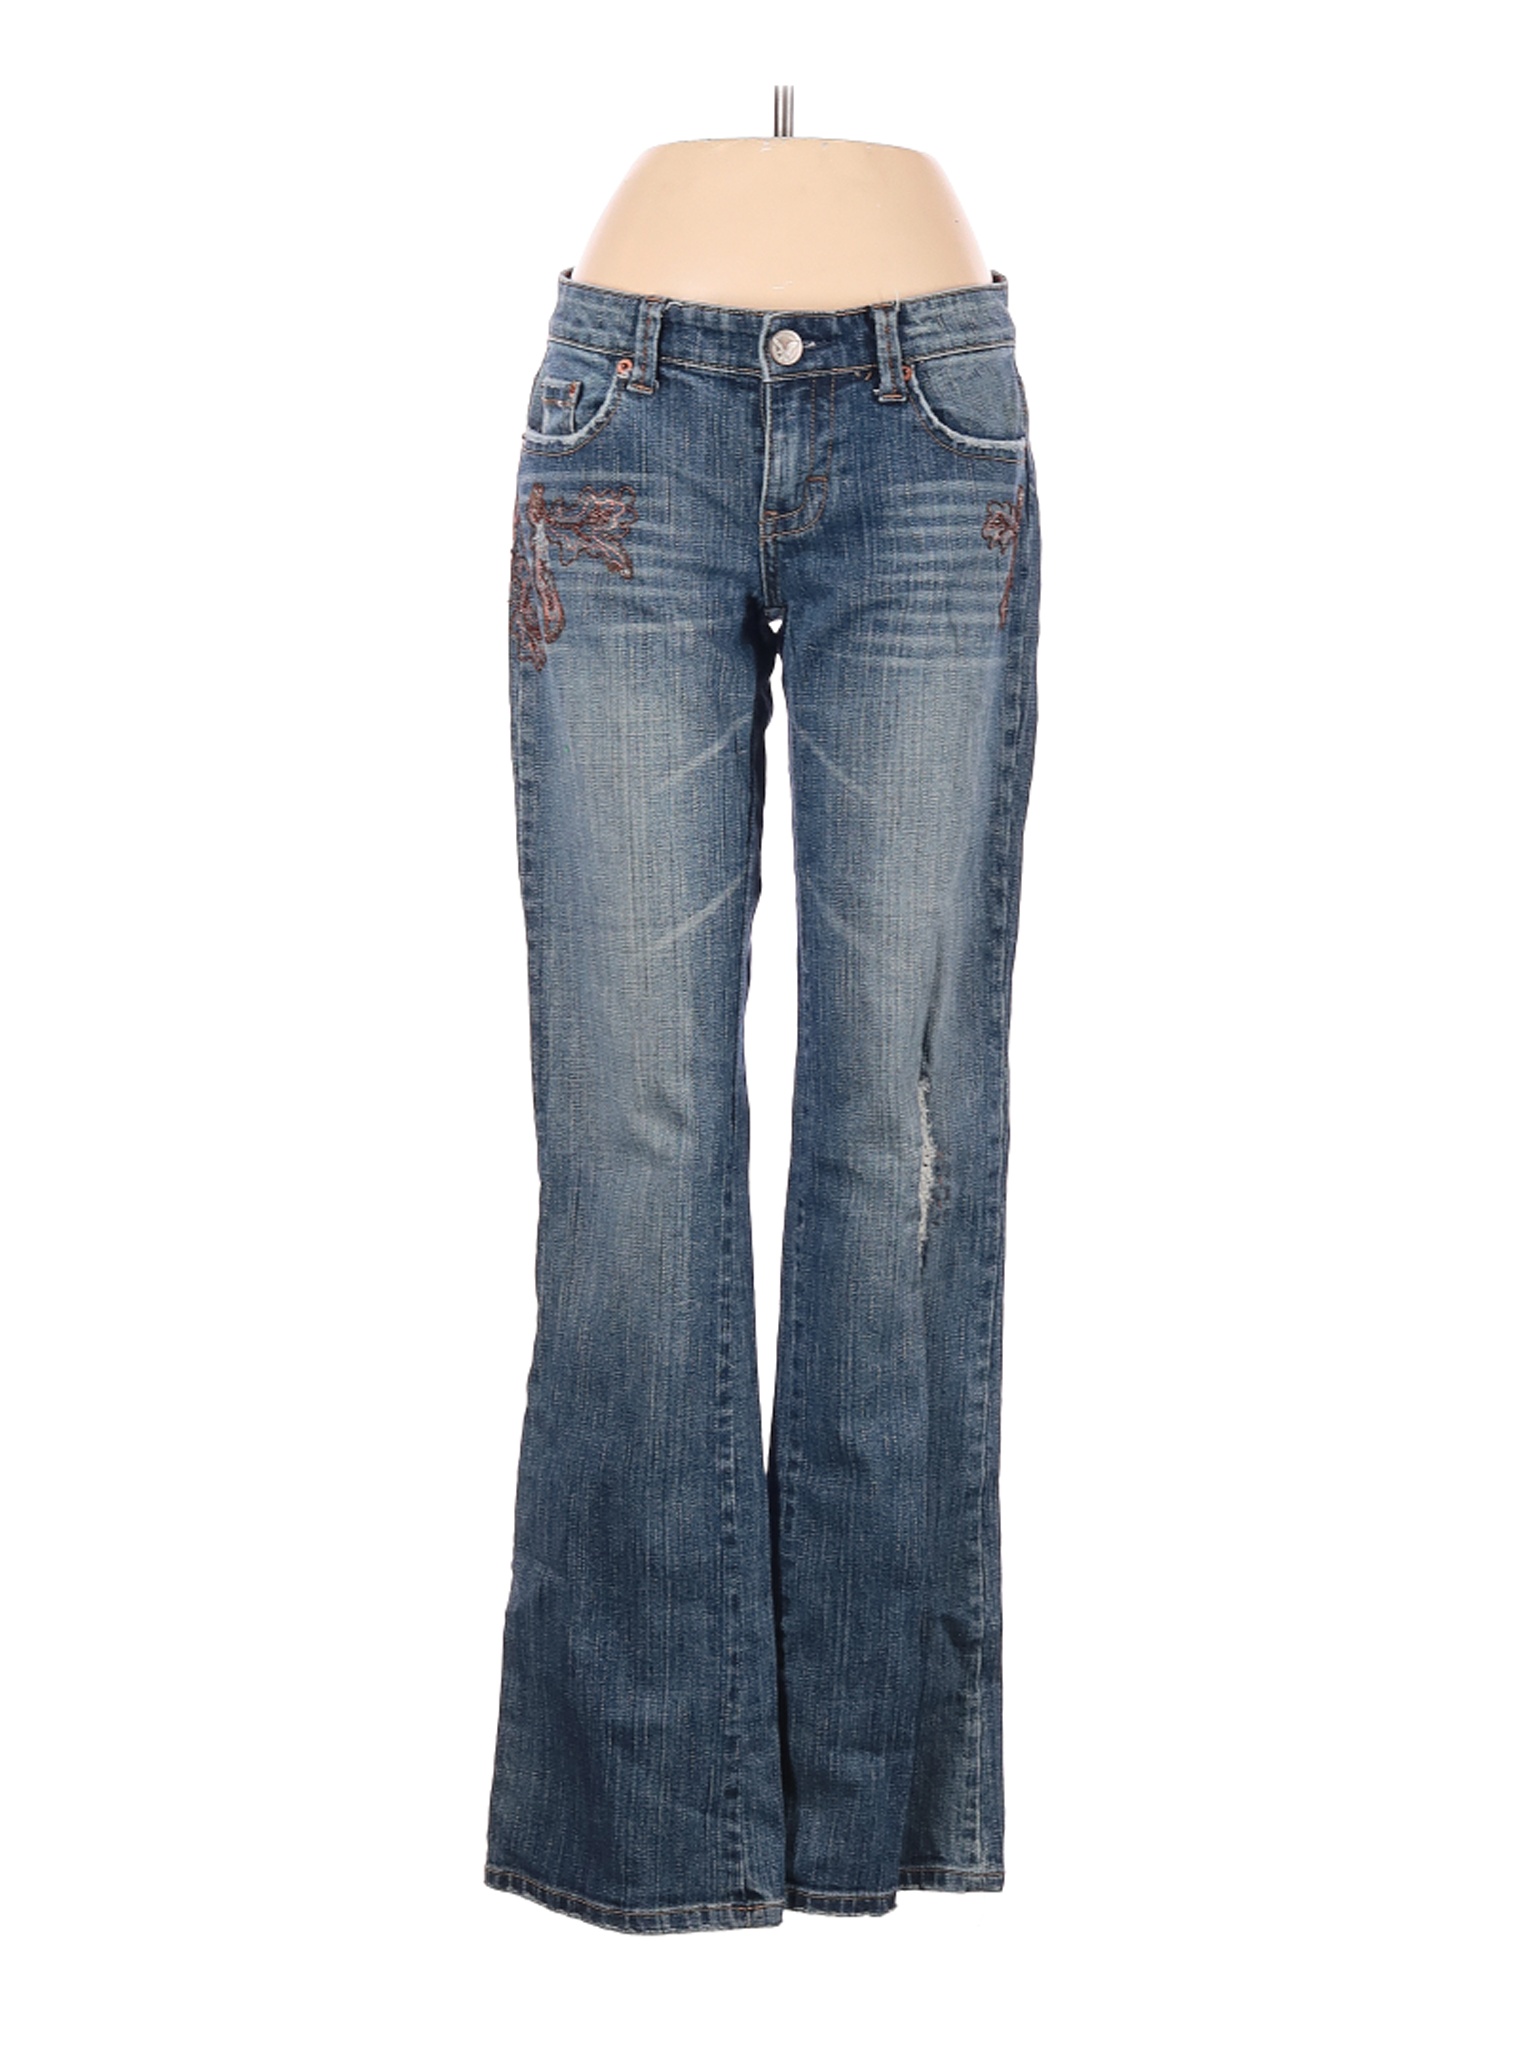 size 0 american eagle jeans